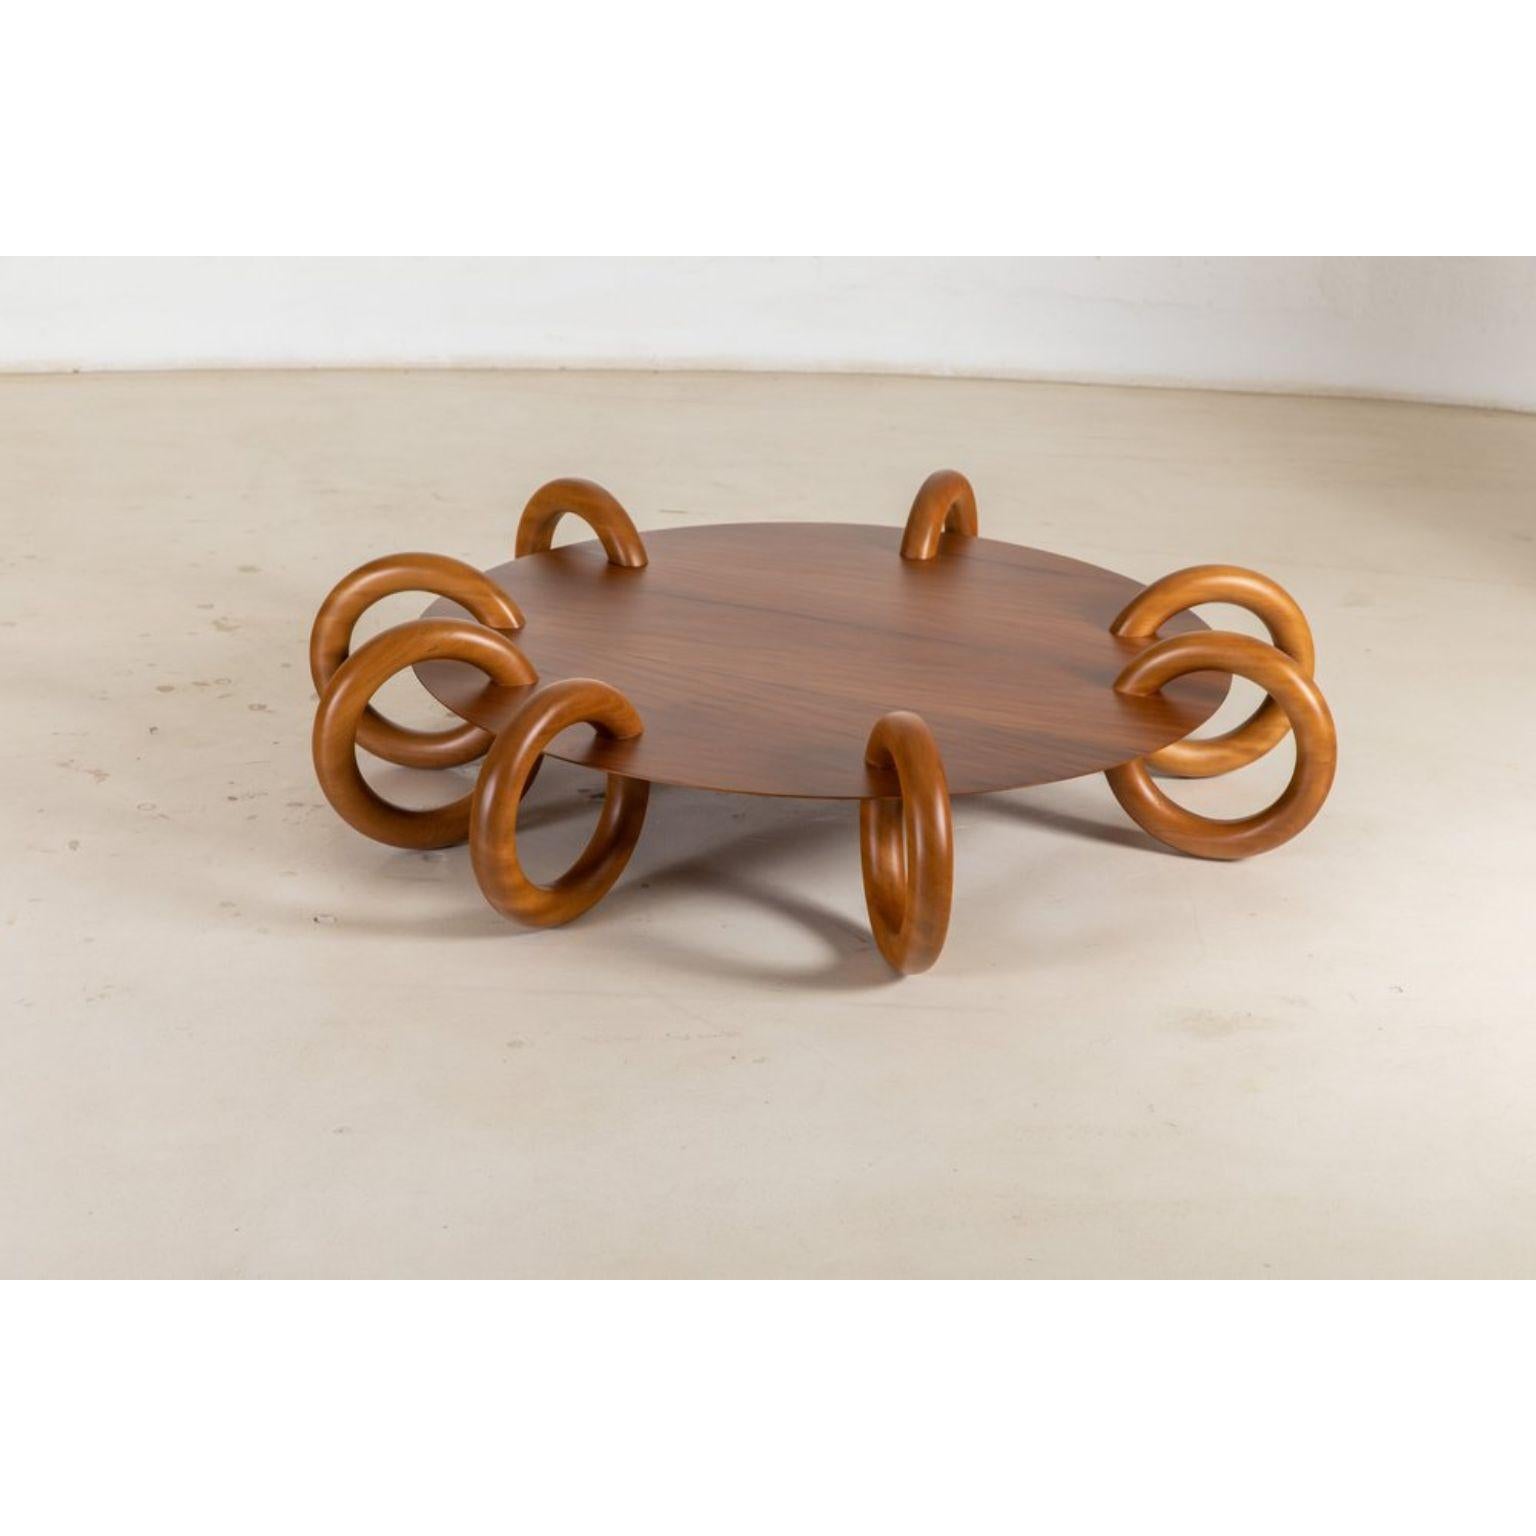 Carrapato Coffee Table by Alva Design
Dimensions: Ø 140 x H 31 cm.
Materials: MDF and solid wood (Peroba Mica).

One counter stool, one screen, one coffee table, two wall sconces, sculptures: furniture and objects that make up a Decollection